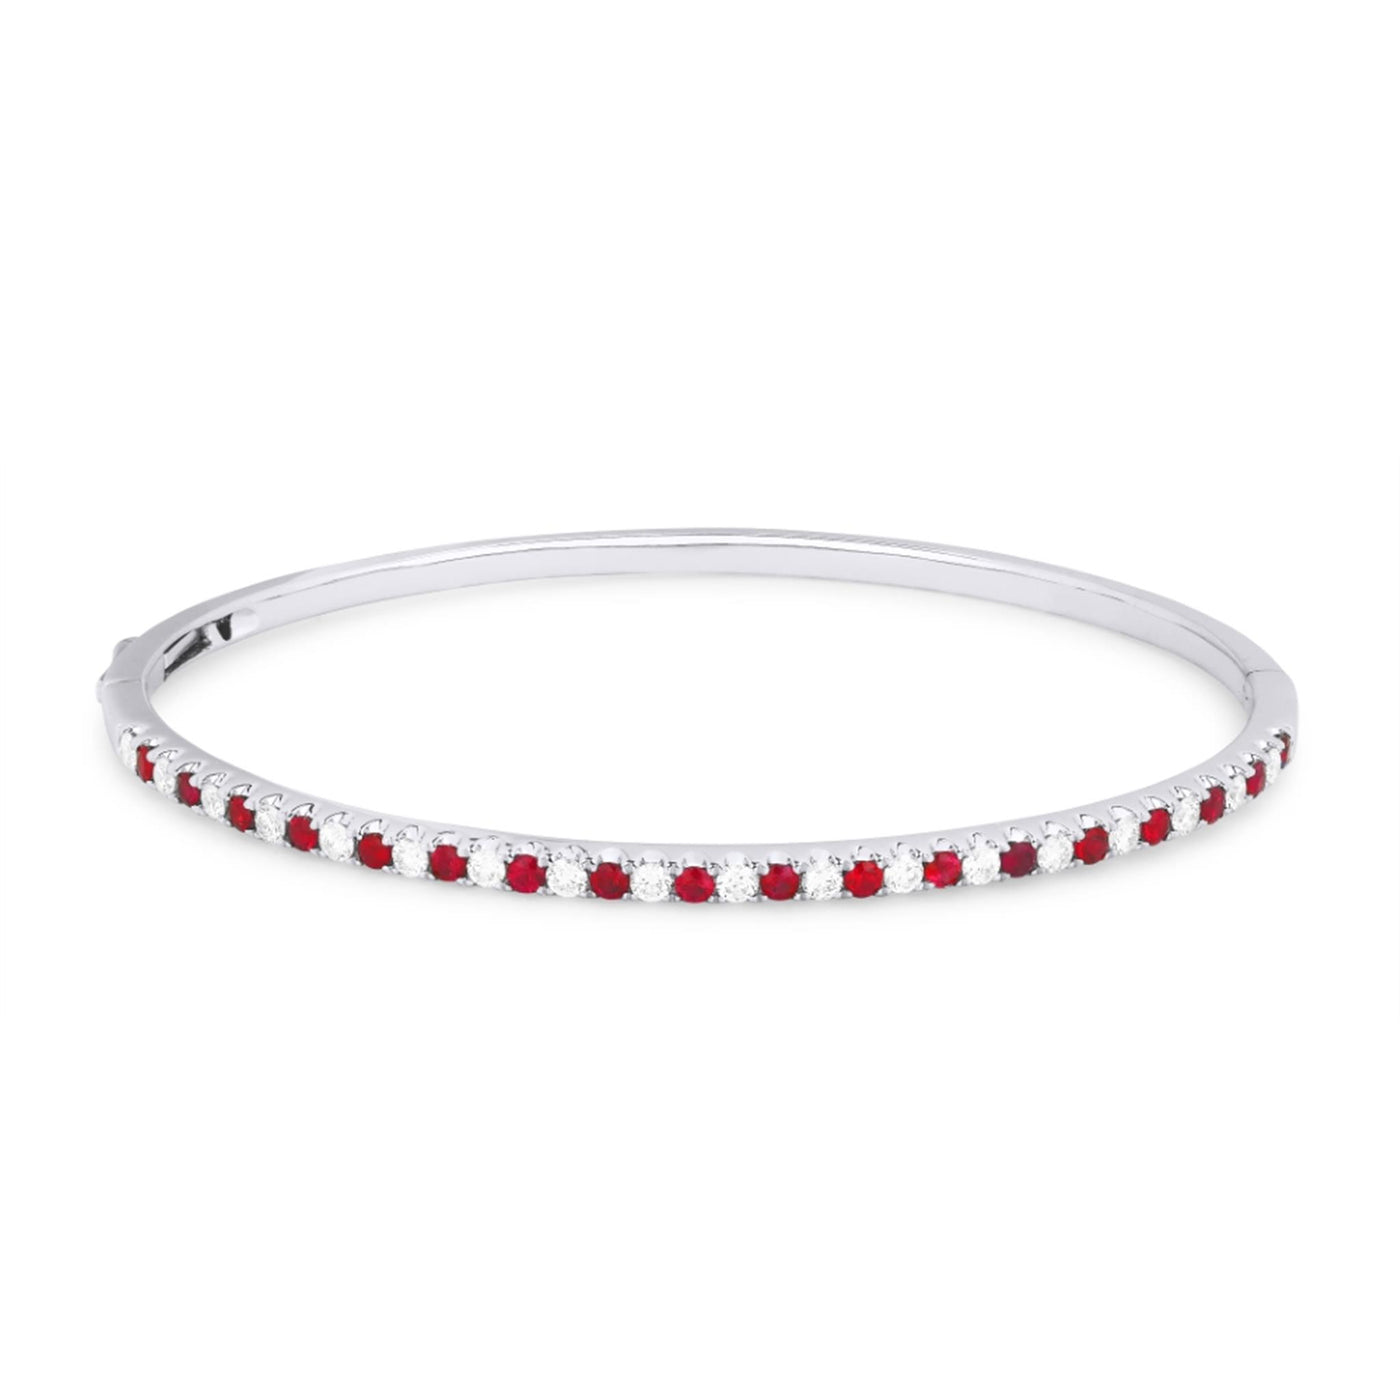 14K White Gold 6.5" Oval Bangle Style Bracelet Featuring Rubies and Diamonds